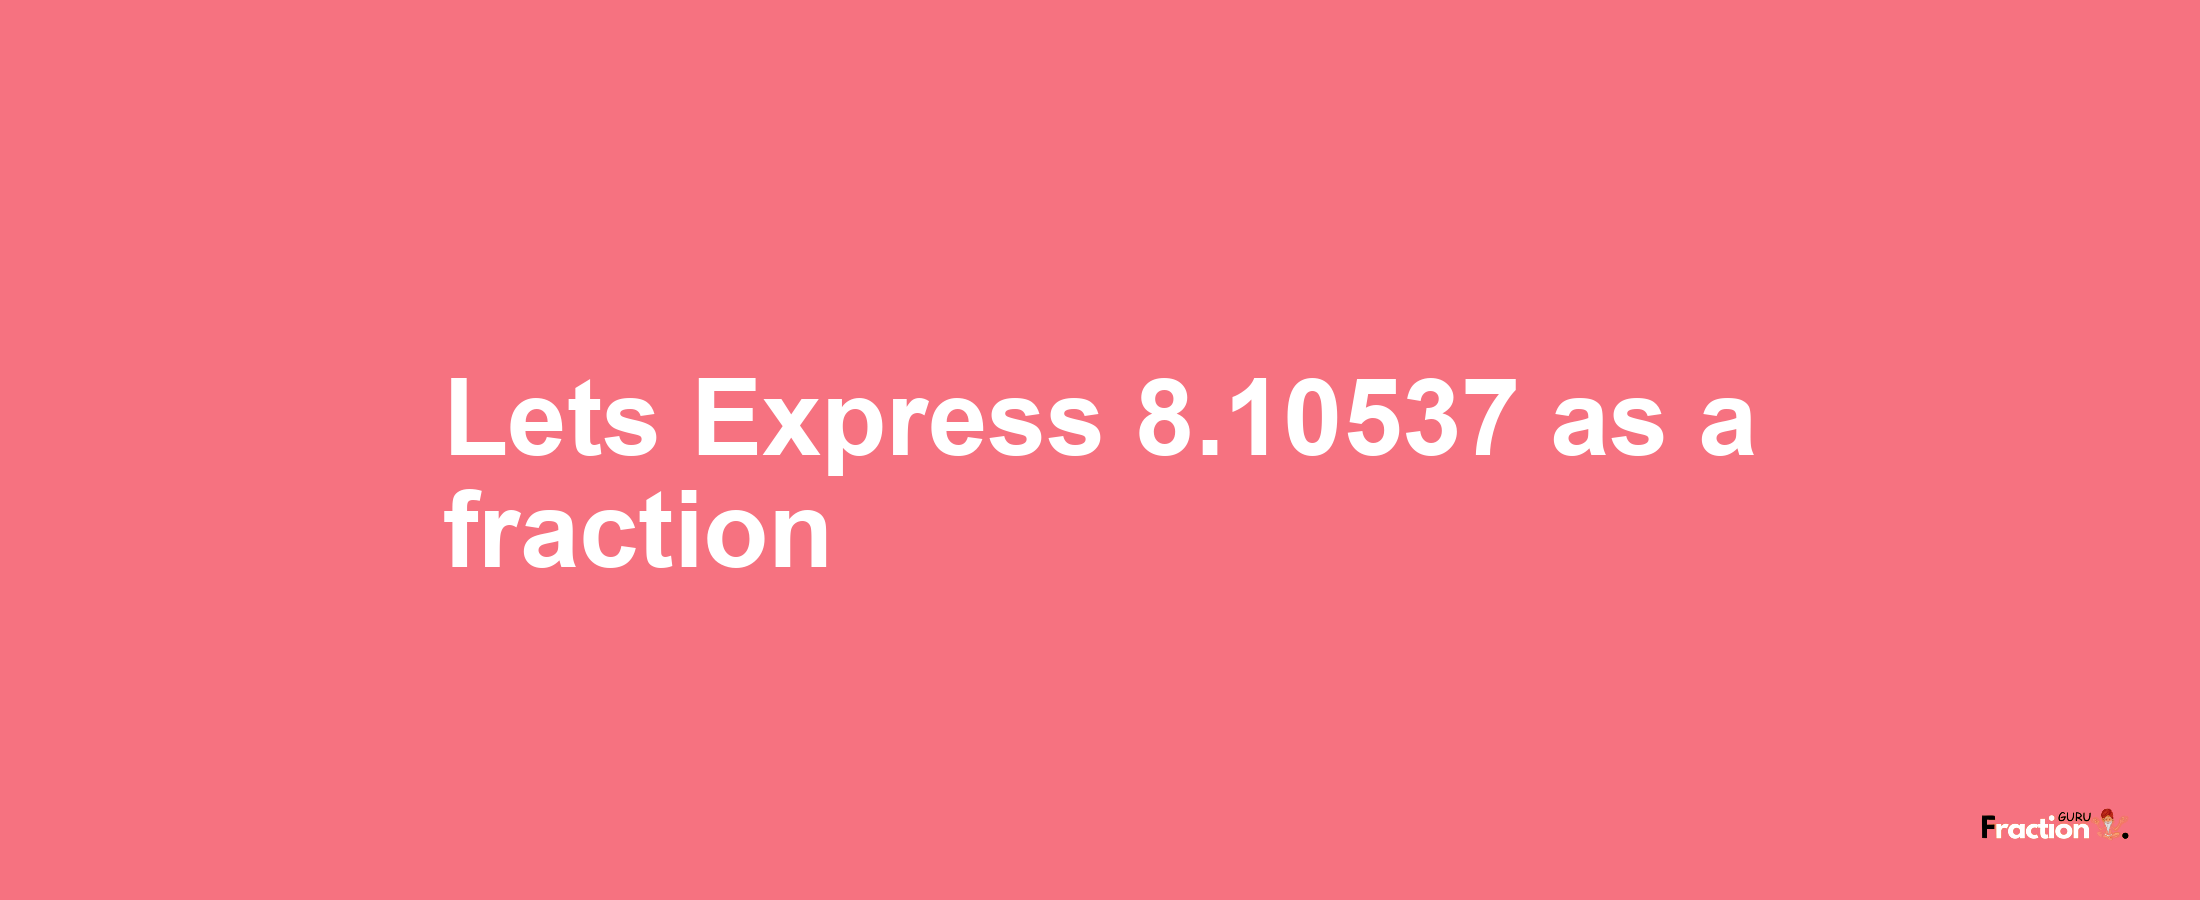 Lets Express 8.10537 as afraction